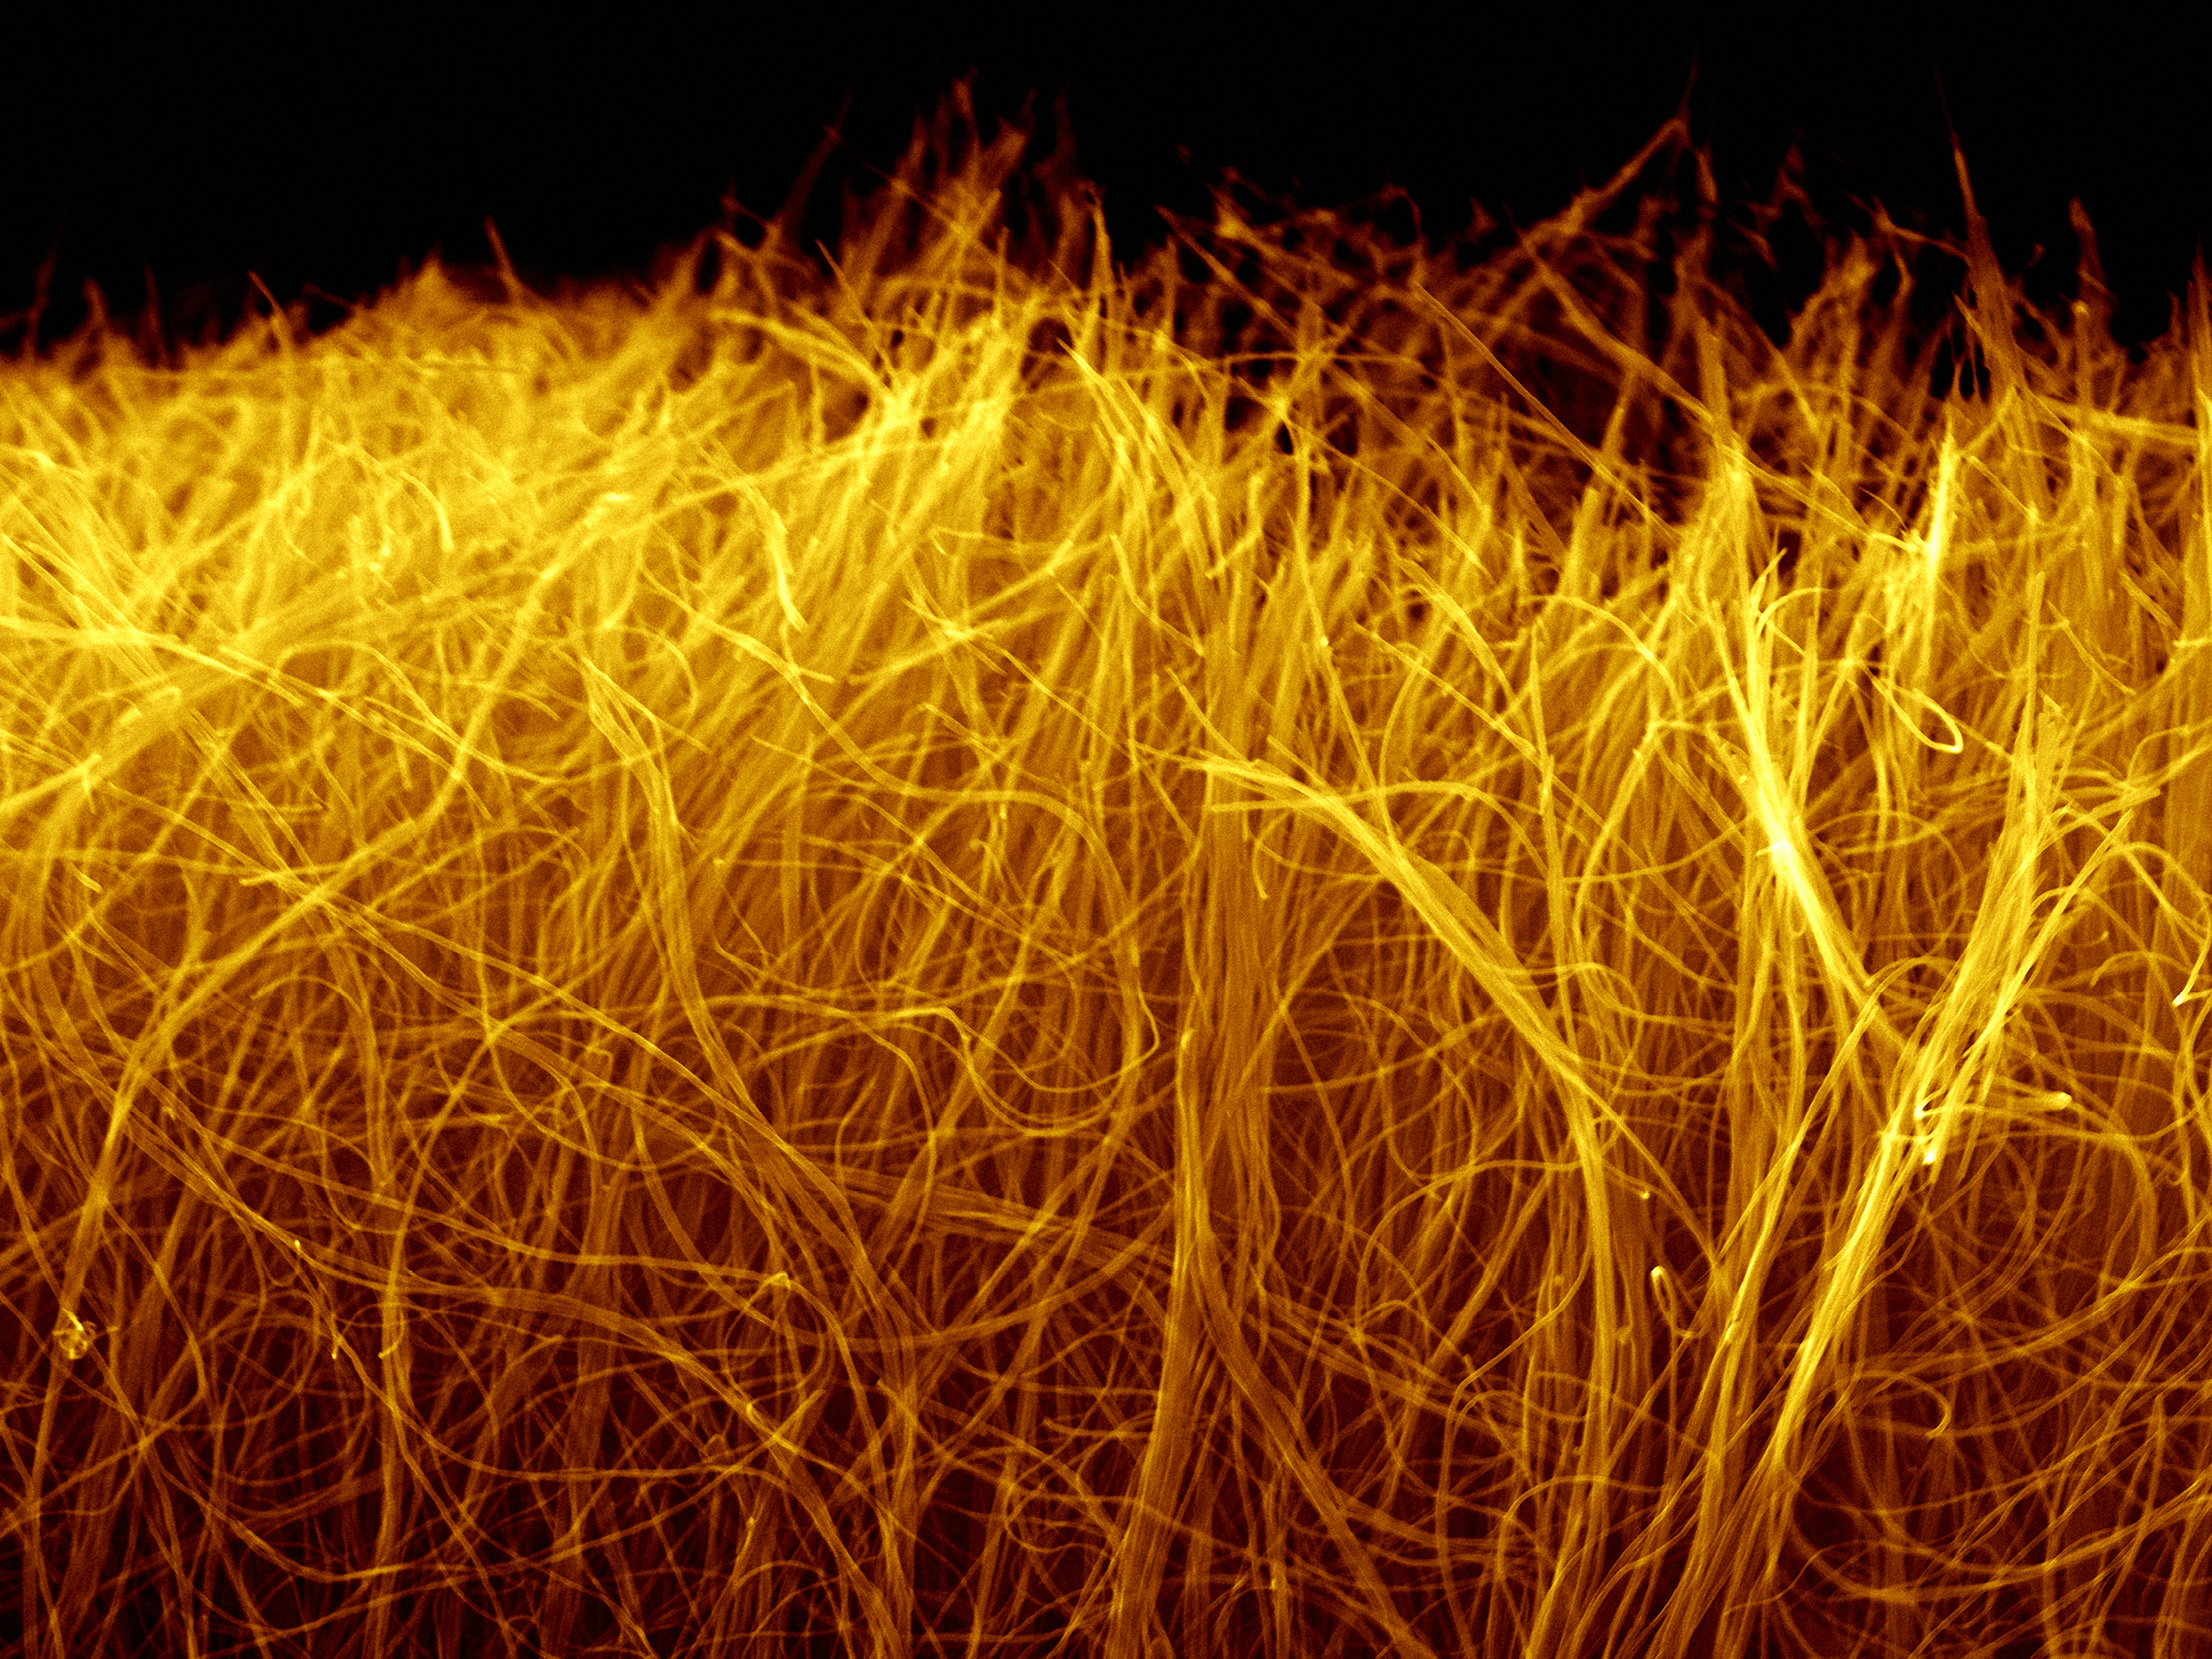 Carbon nanotubes in free-standing macroscale sheets (one of a few promising approaches for electric energy storage) was one of the 11 images on display at "Small and Exquisite." by Ph.D. students Min Heon & Boris Dyatkin  NanoMaterials Group (Prof. Yury Gogotsi) Zeiss Supra 50VP SEM, CRF